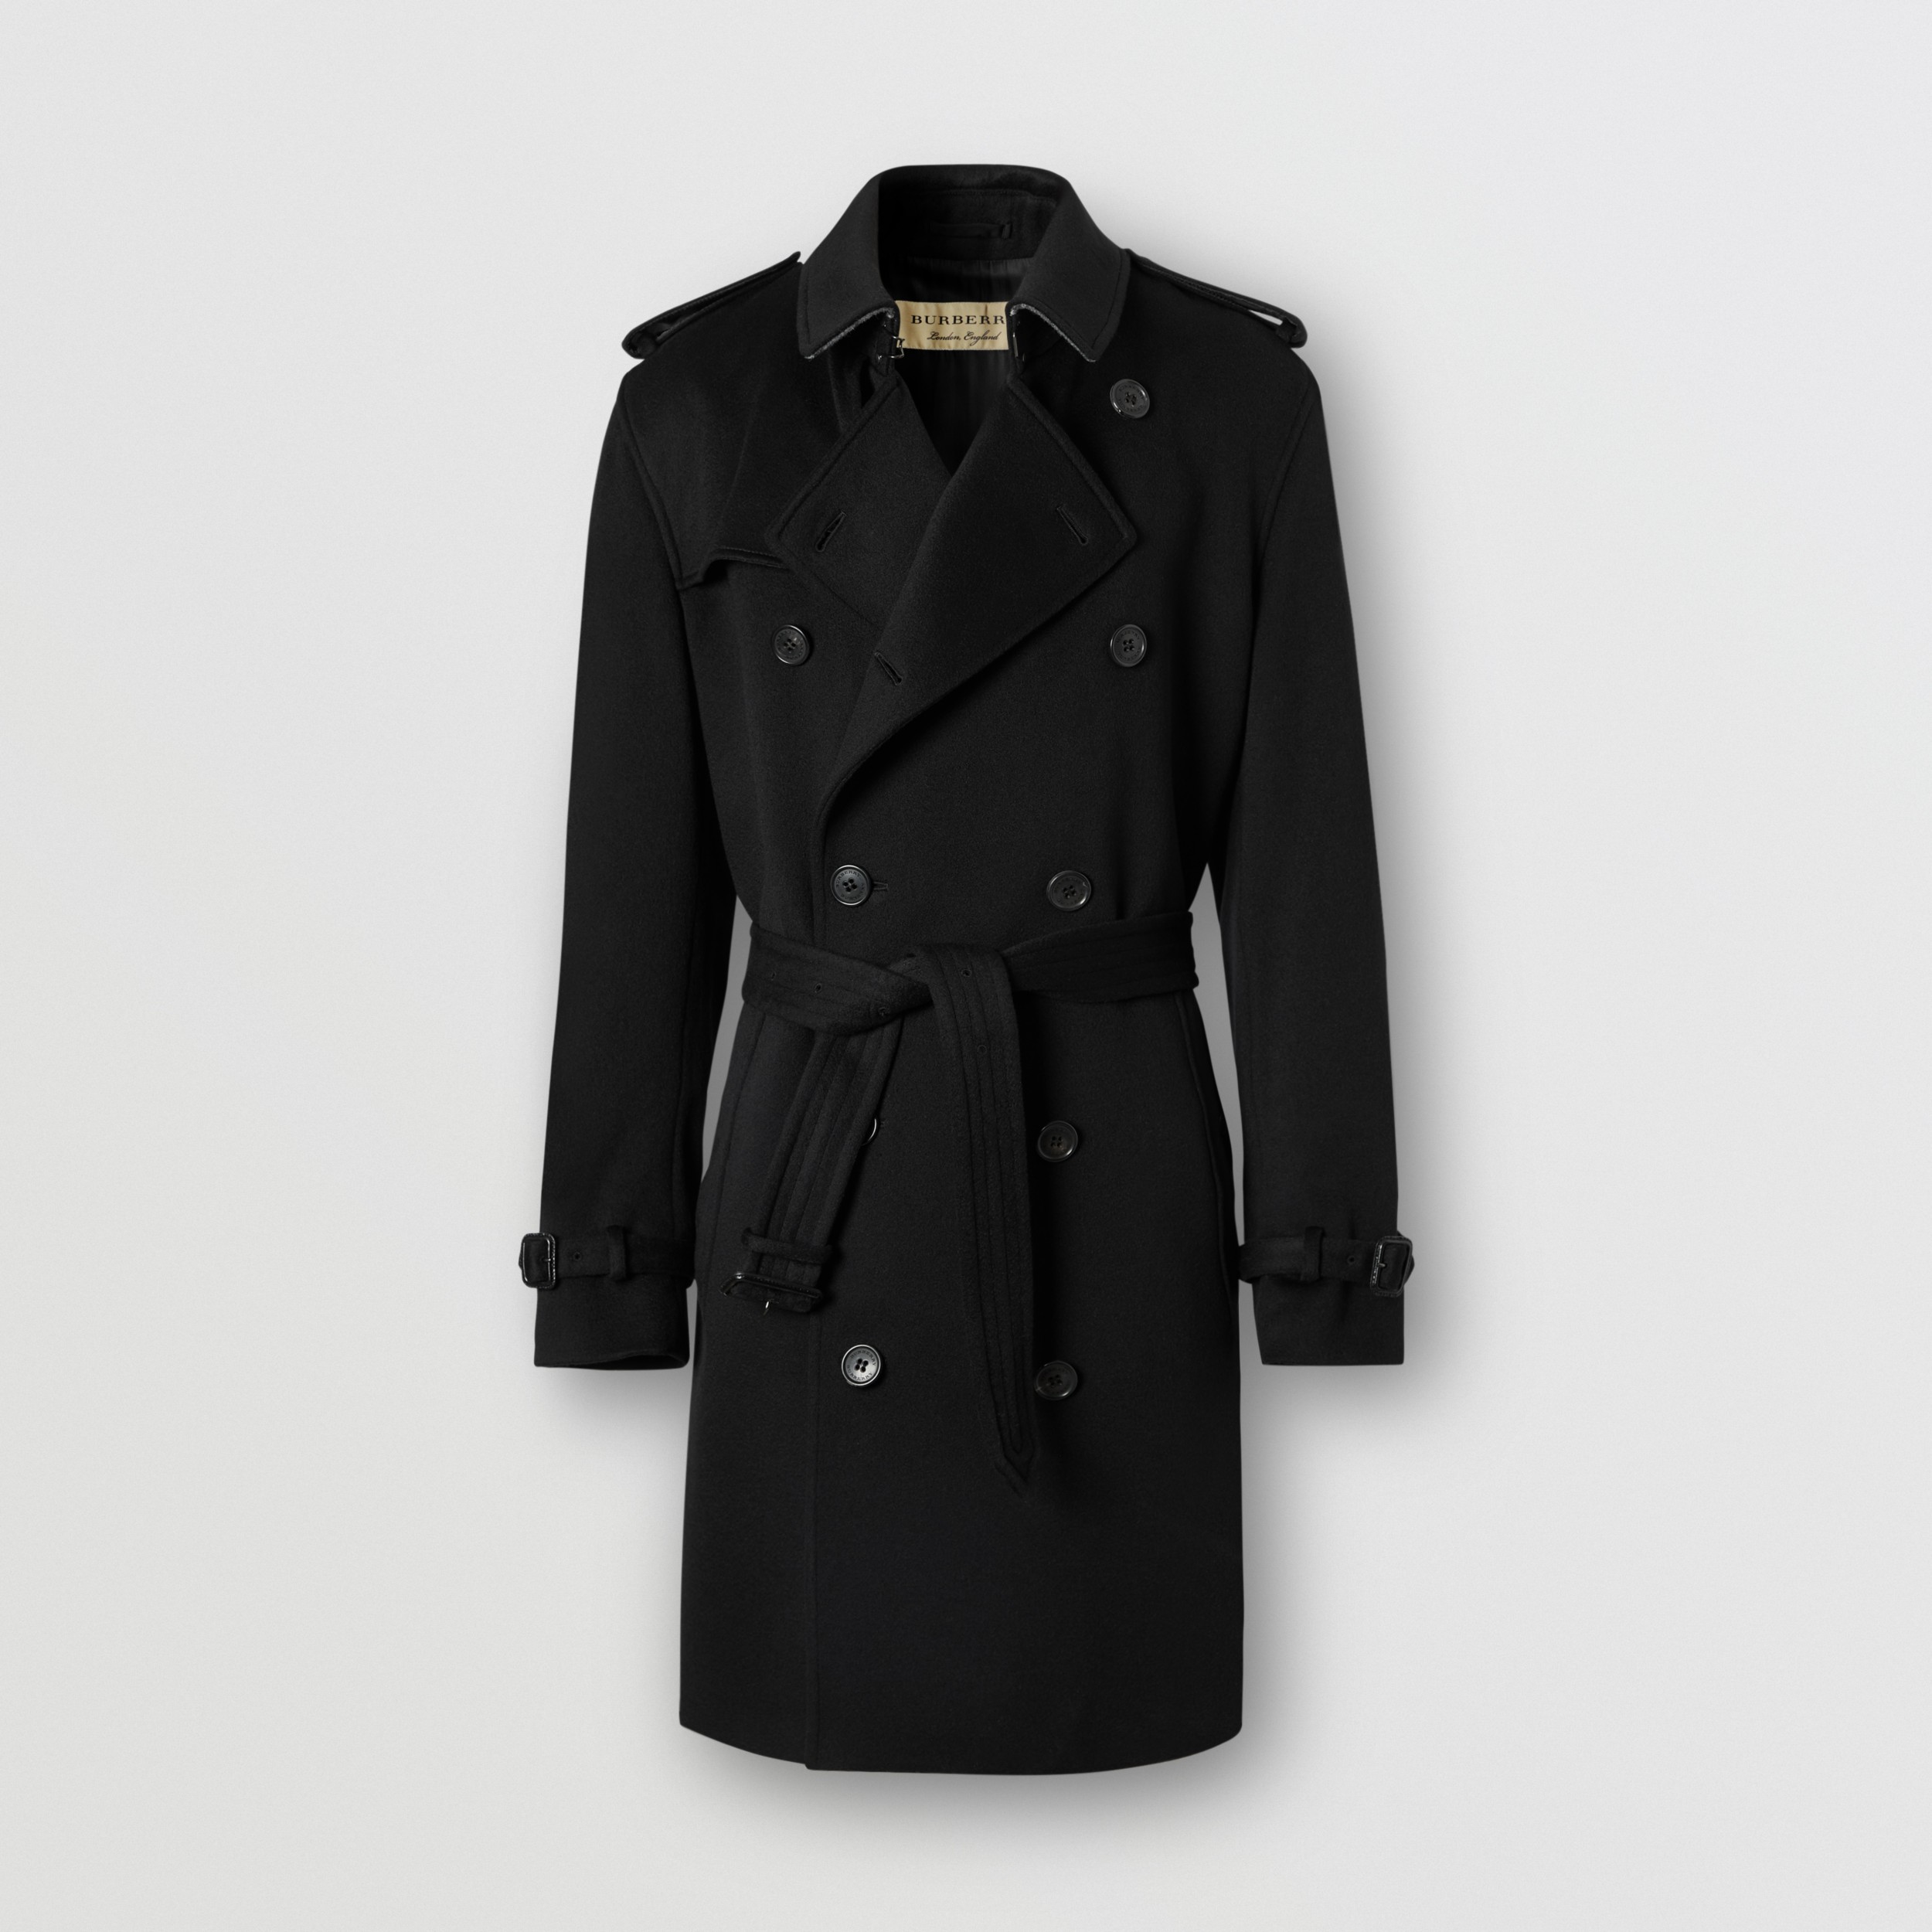 Cashmere Trench Coat in Black - Men | Burberry United States